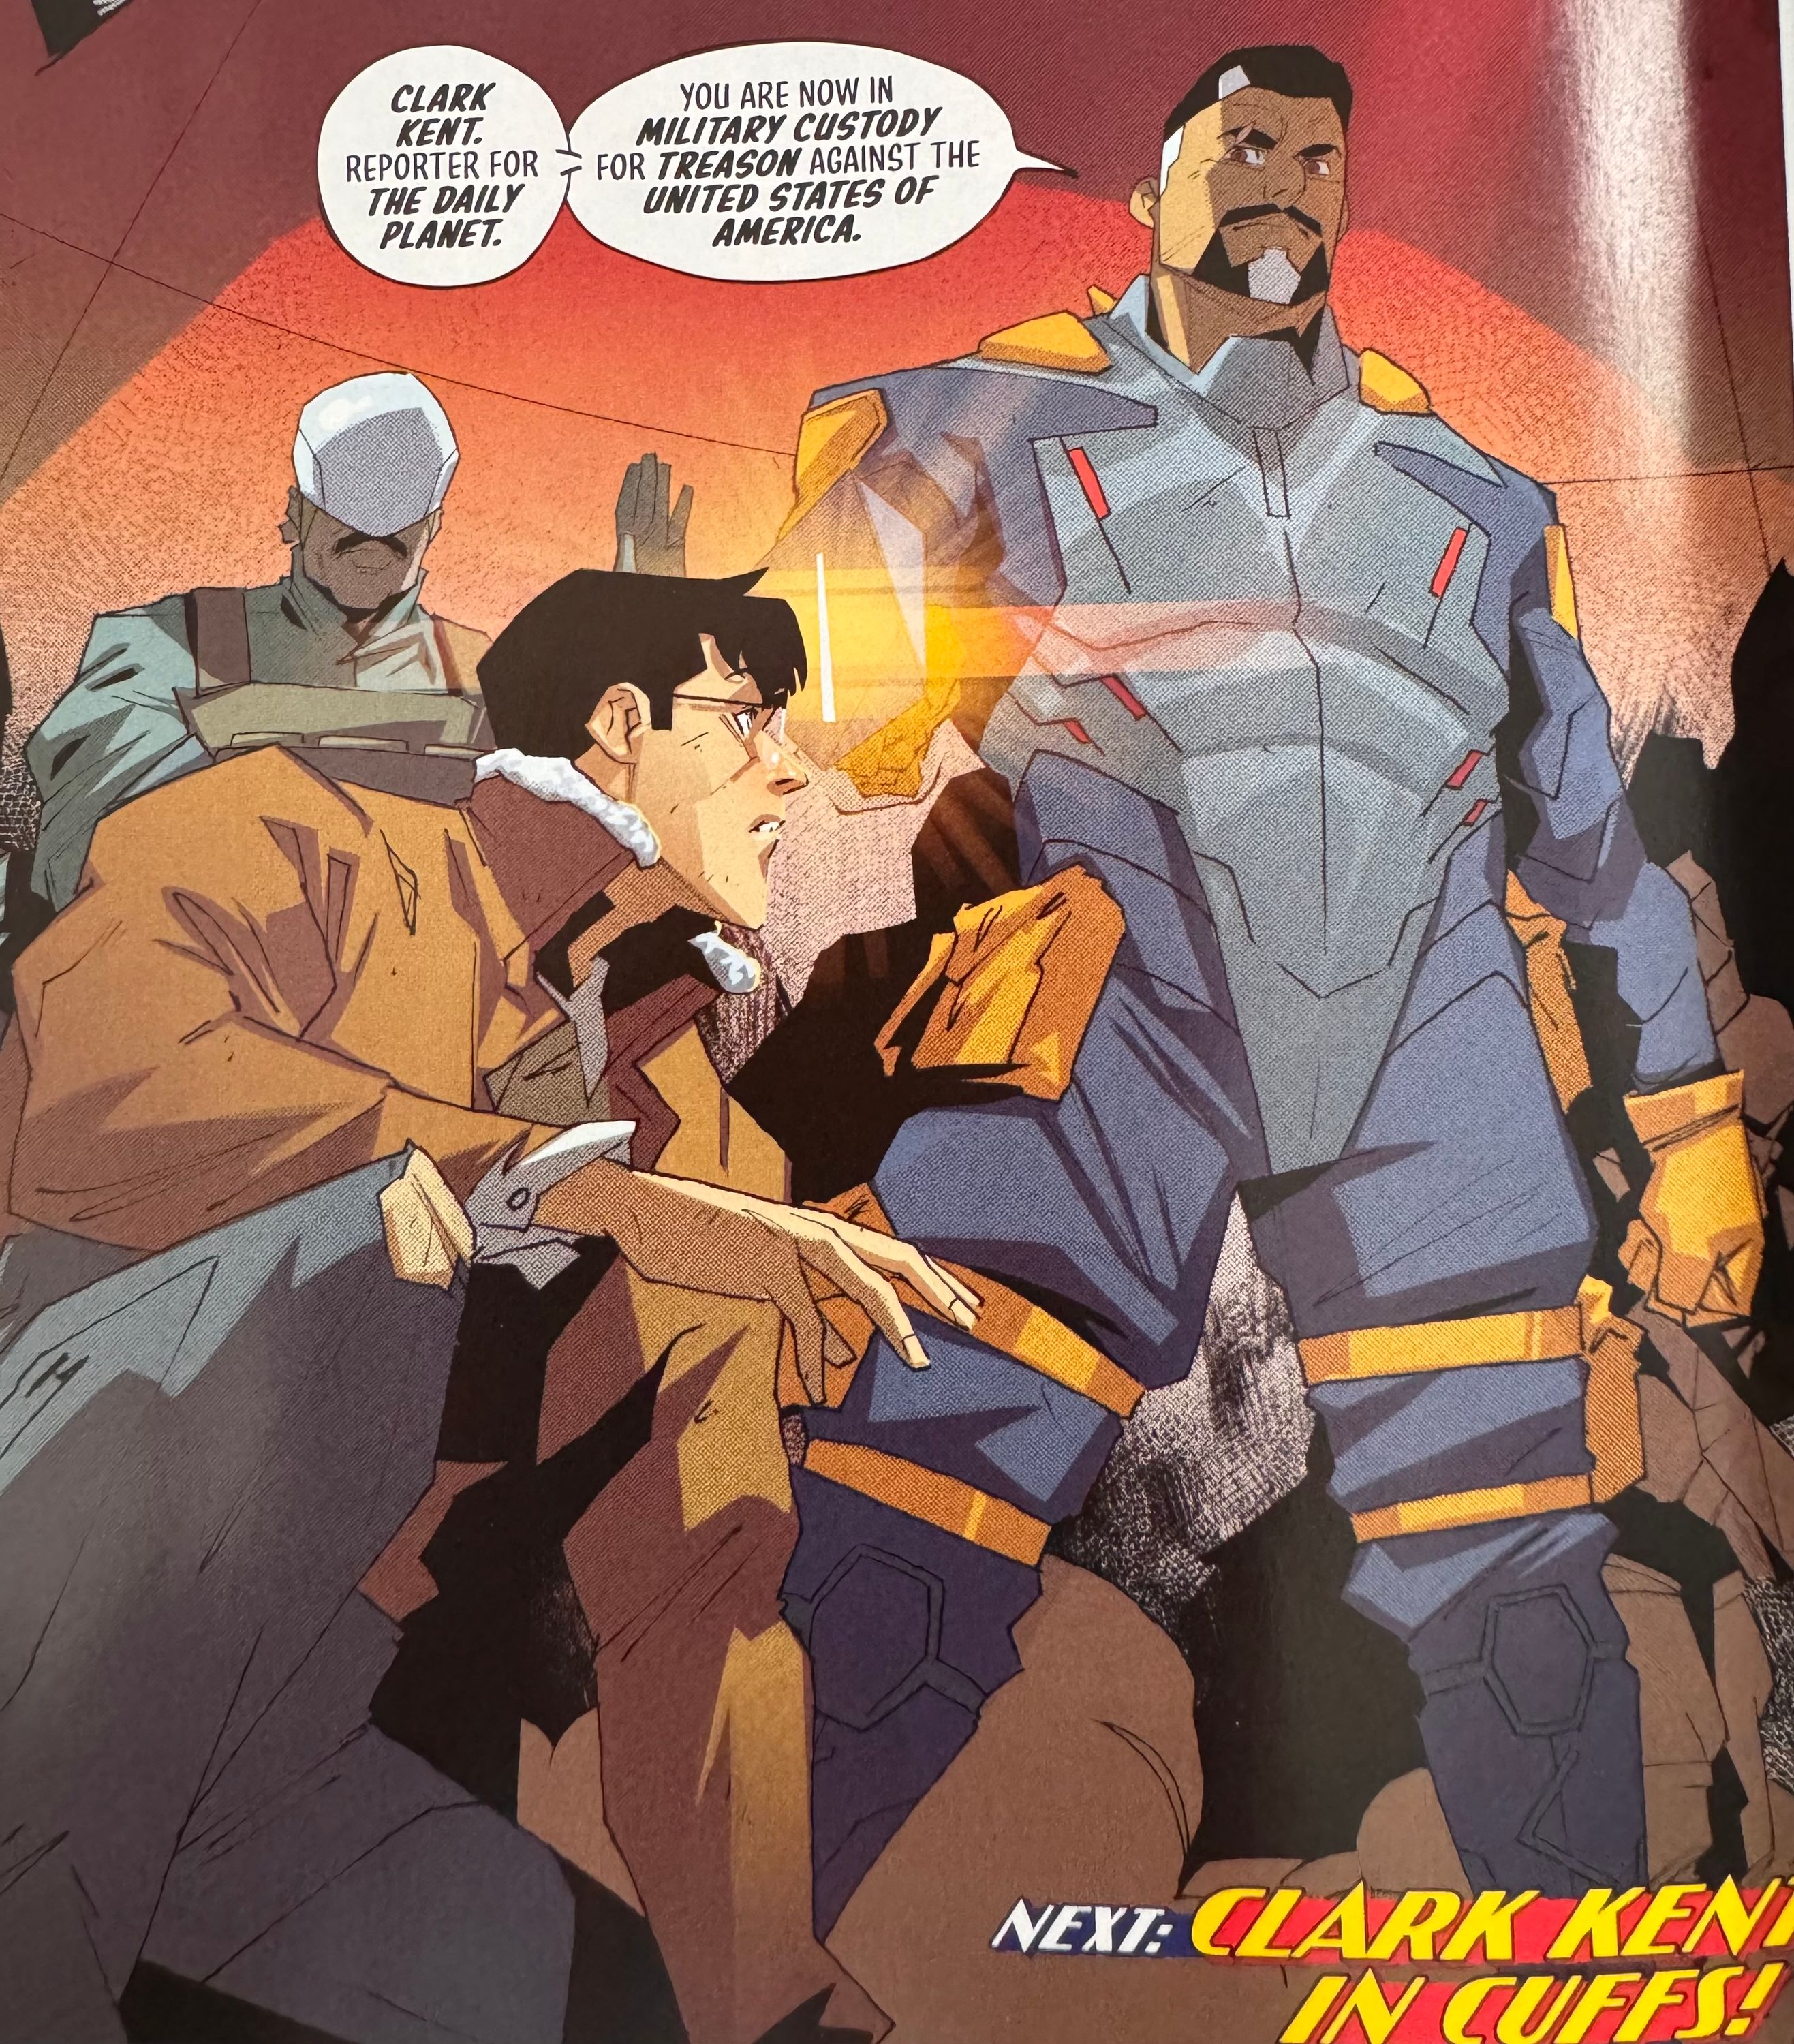 Comic book panel showing Bloodspot holding a gun to Clark. Dialogue reads “CLARK KENT. REPORTER FOR THE DAILY PLANET. YOU ARE NOW IN MILITARY CUSTODY FOR TREASON AGAINST THE UNITED STATES OF AMERICA.” Caption at the bottom reads “Next: Clark Kent in cuffs!”